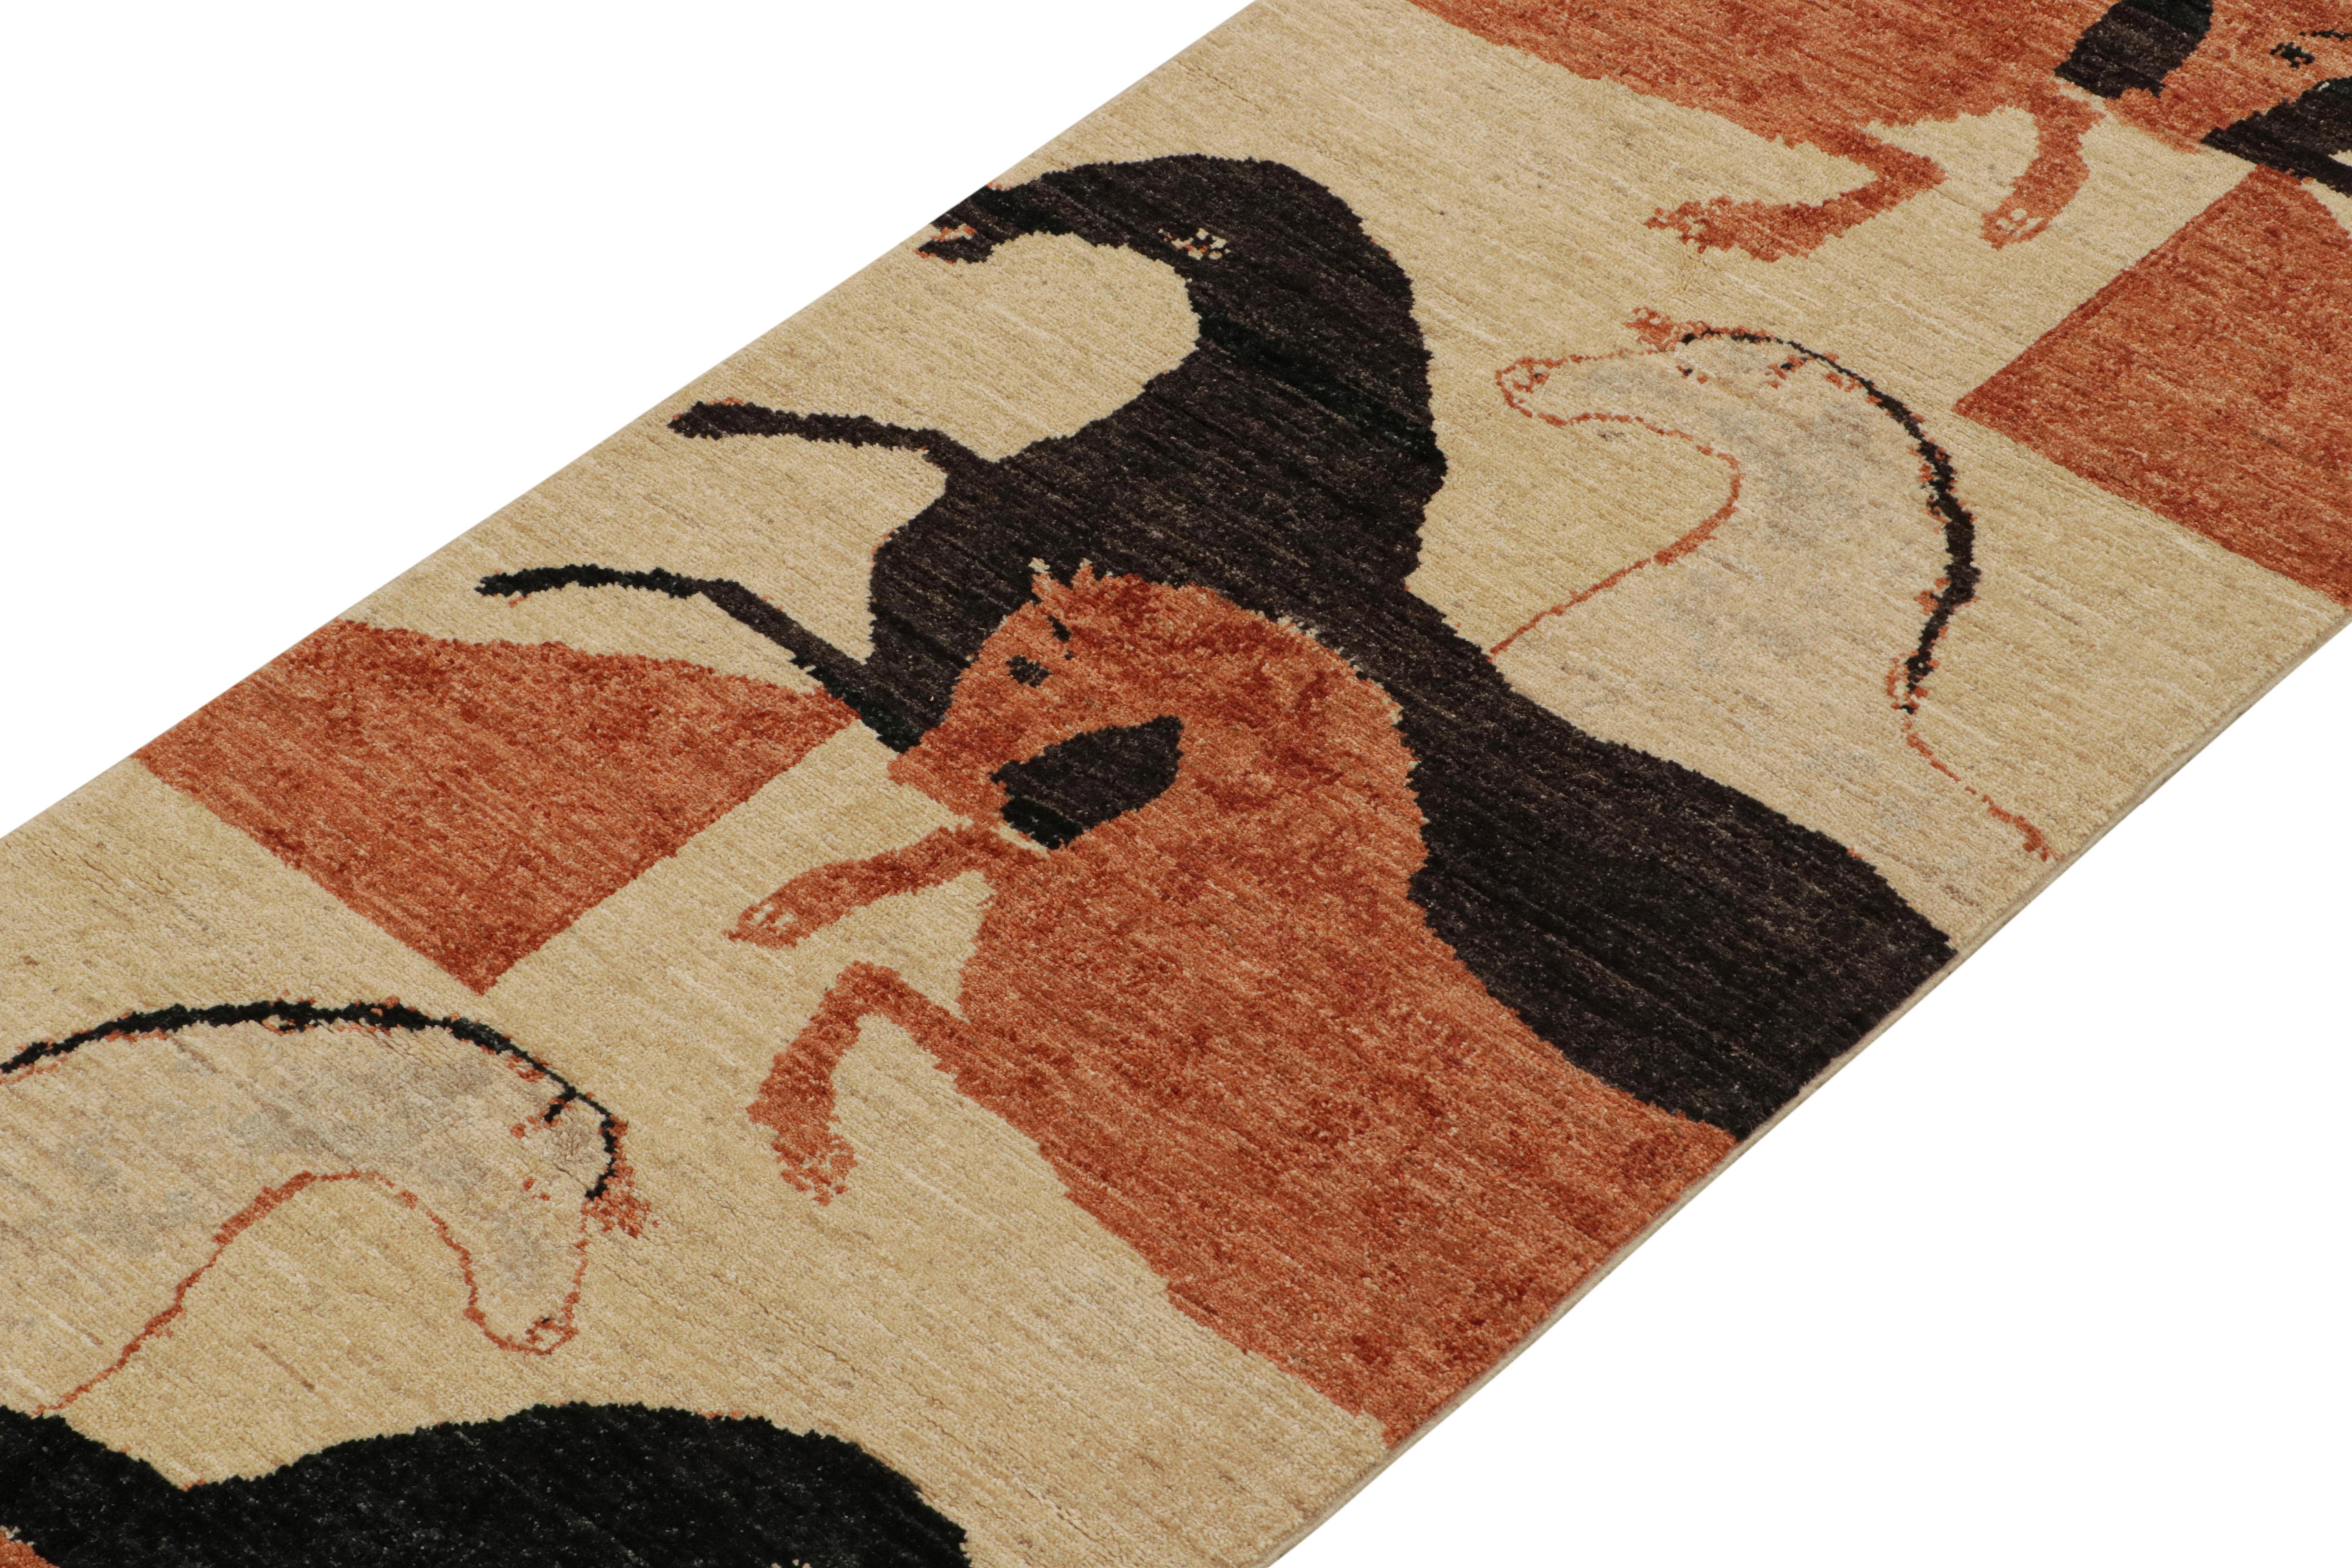 This new addition to Rug & Kilim’s Modern Classics collection is a 3x10 pictorial runner—a contemporary resurrection of one of the most collectible primitivist styles. 

Further on the Design:

Hand-knotted in wool, this piece is inspired by